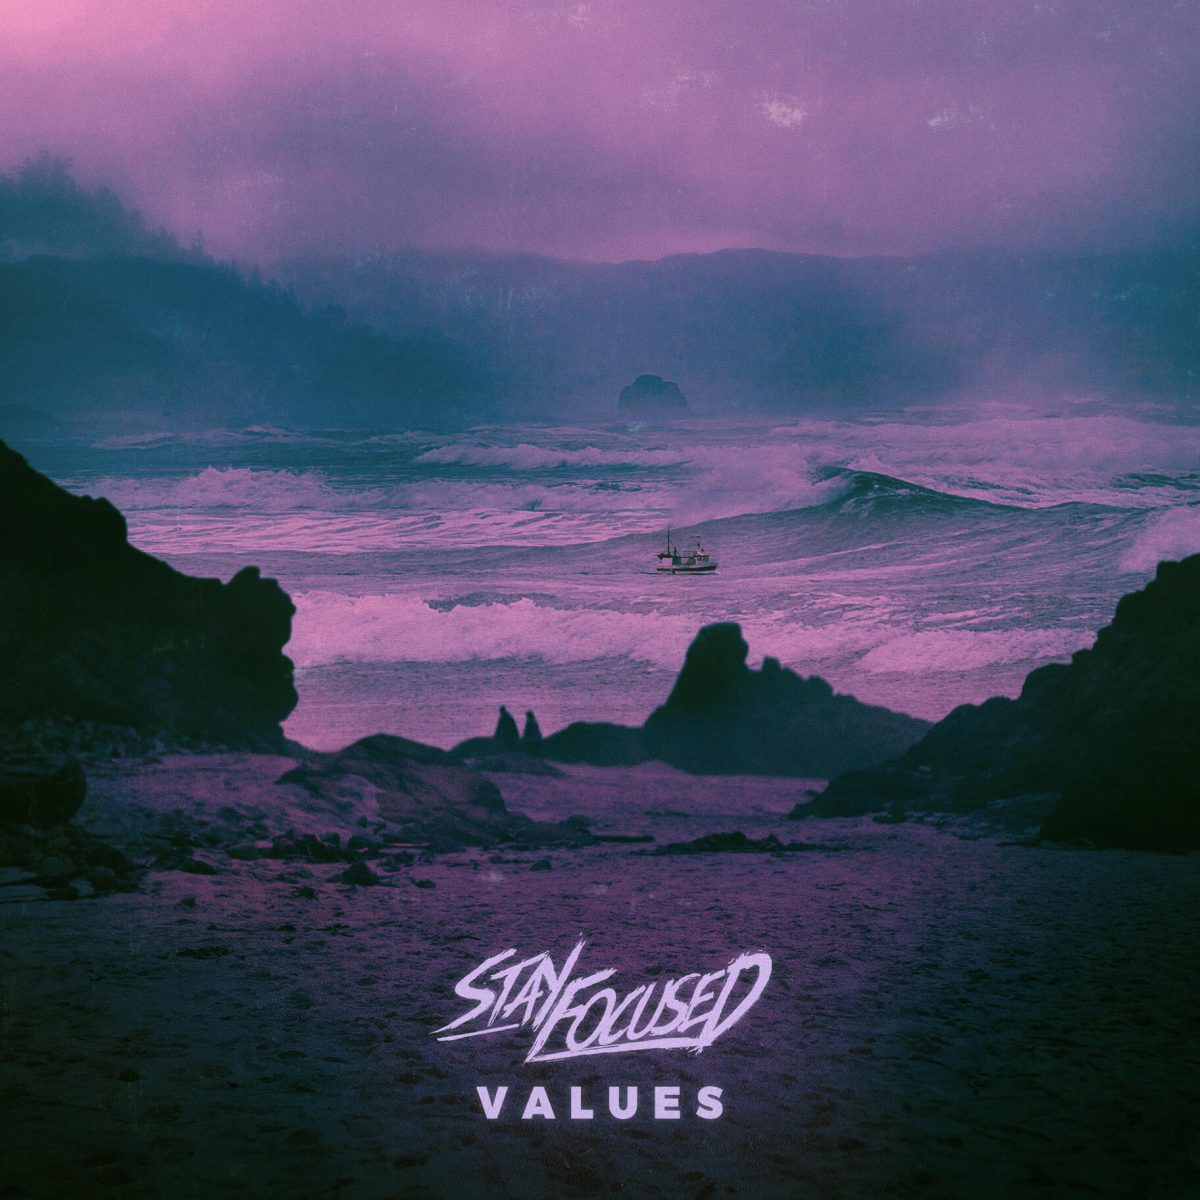 stay-focused-values-album-review